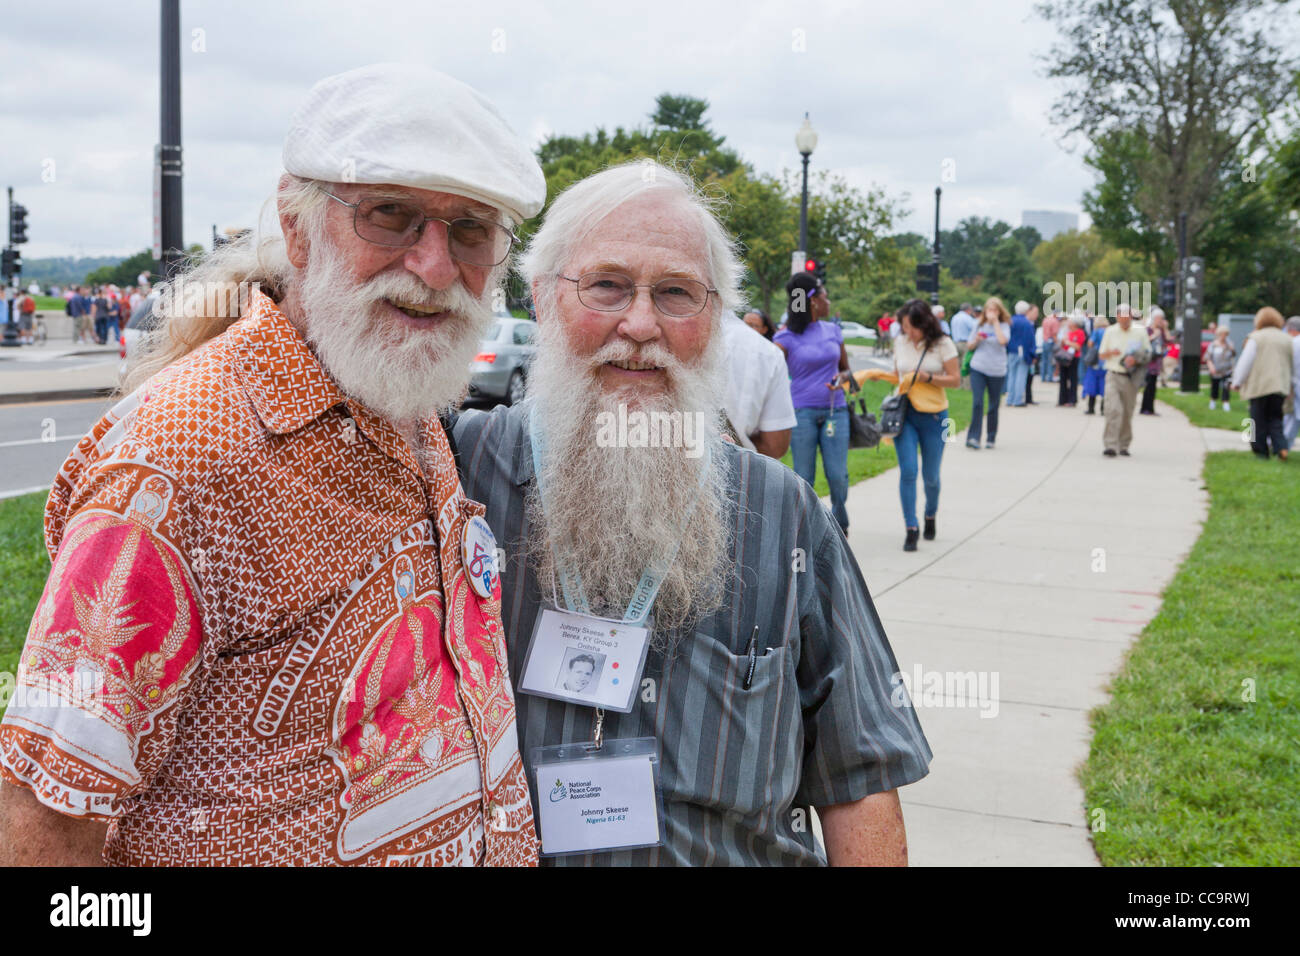 Elderly brothers at World Peace rally Stock Photo